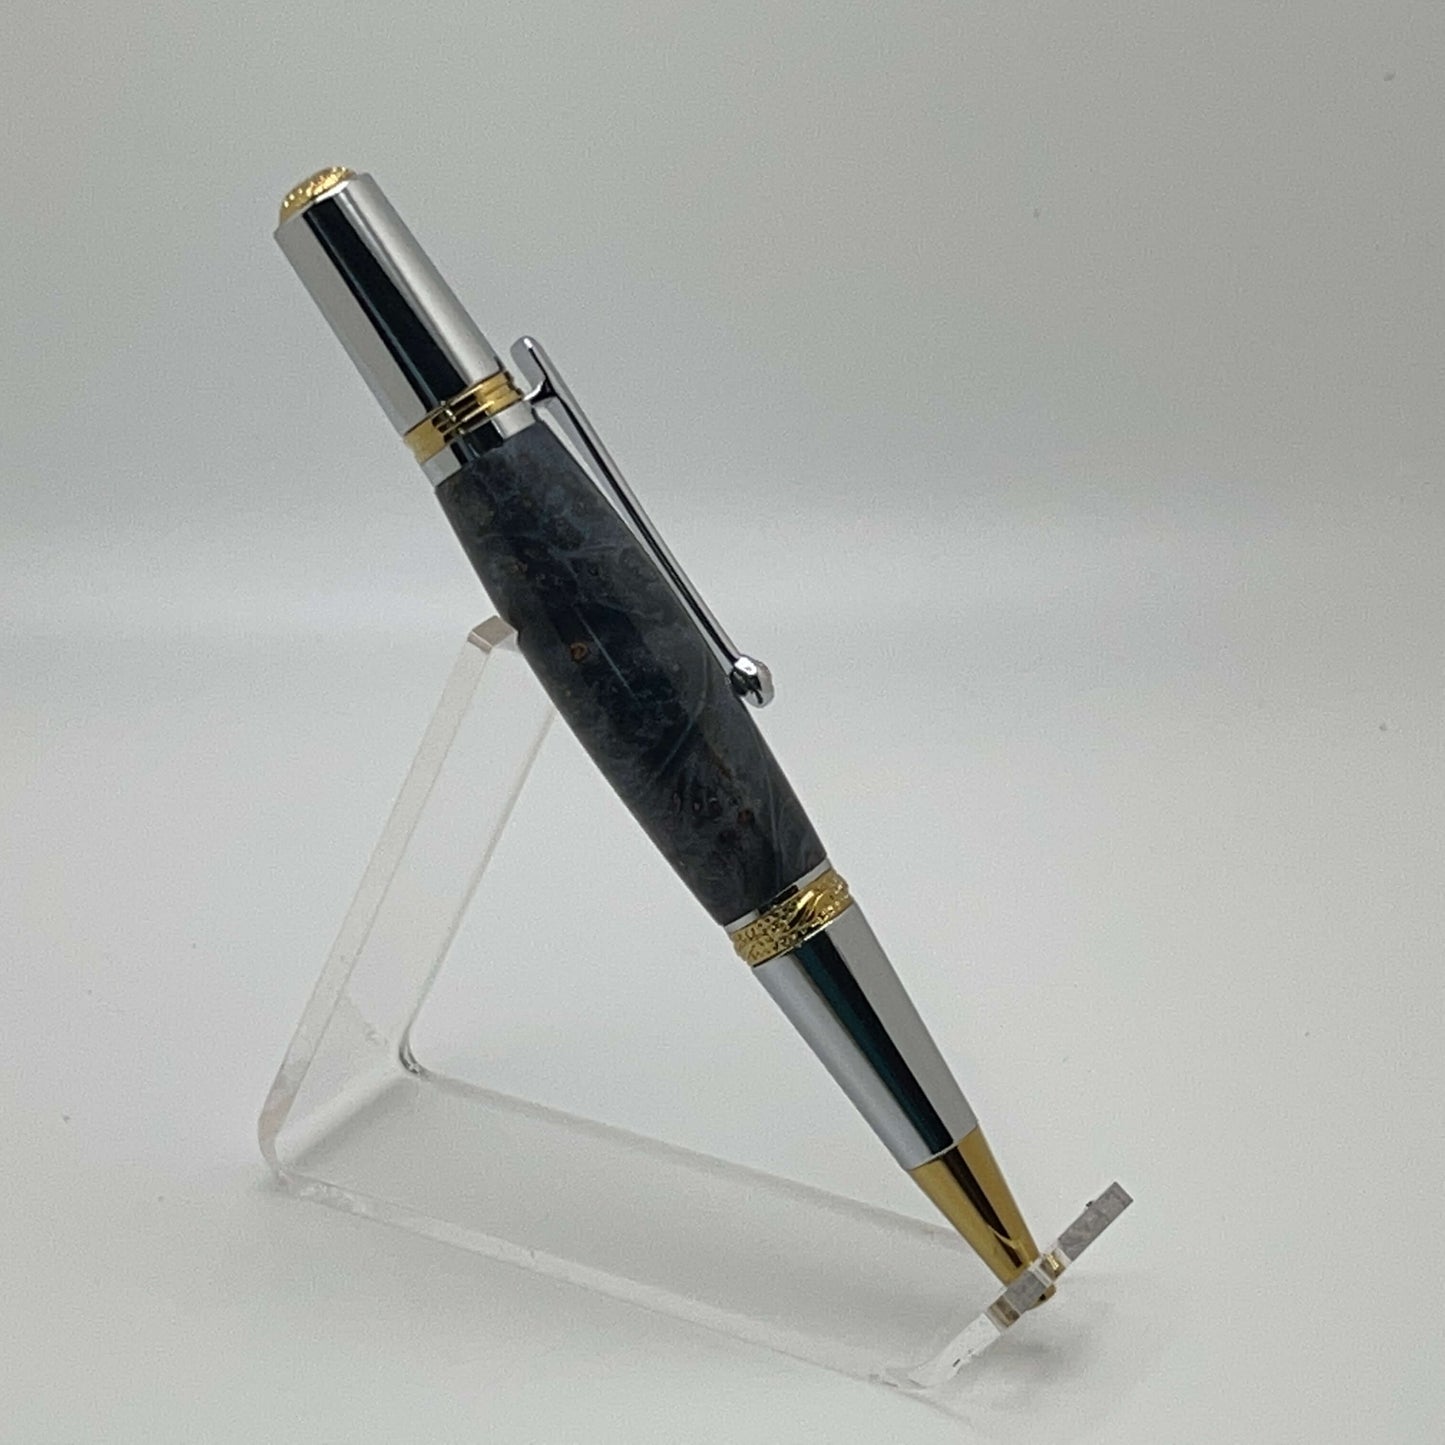 Blue Majestic Squire in Gold Titanium and Chrome: A Pen of Pure Elegance and Sophistication